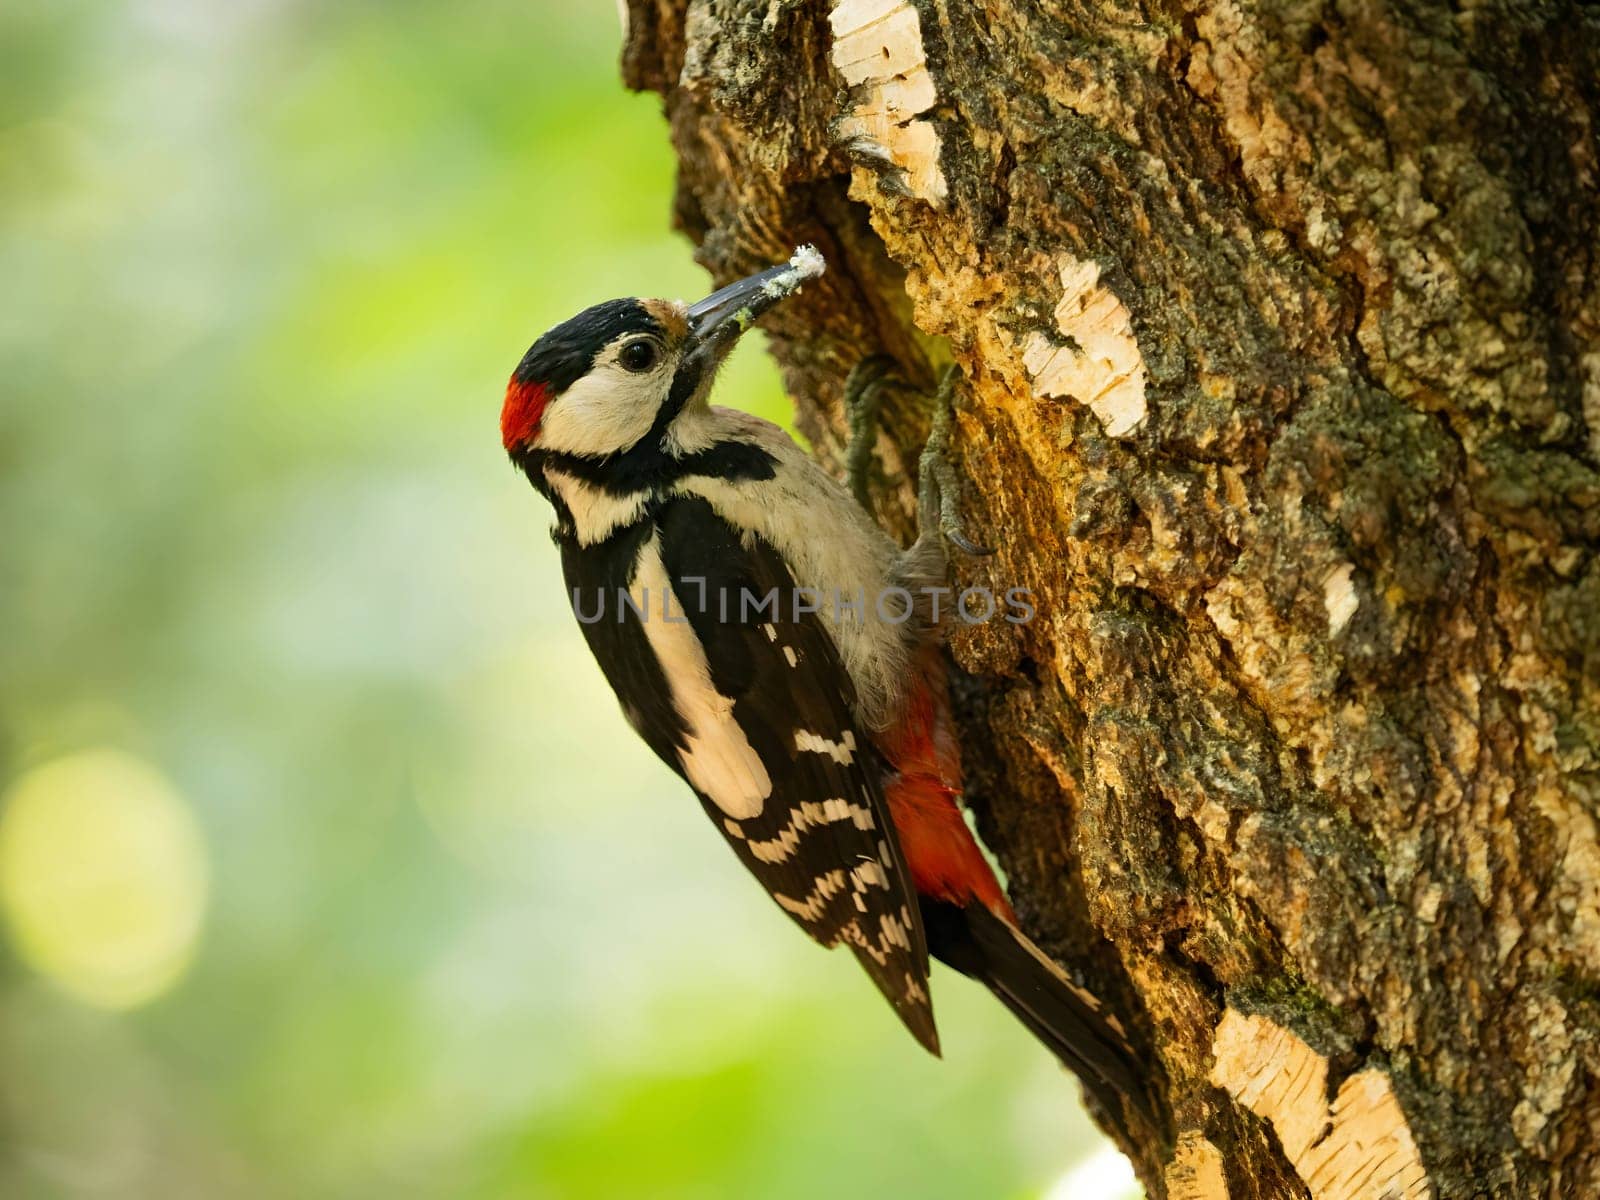 The vibrant greenery serves as a backdrop to the majestic sight of a Great Spotted Woodpecker perched on a birch tree, its red crown shining brightly.